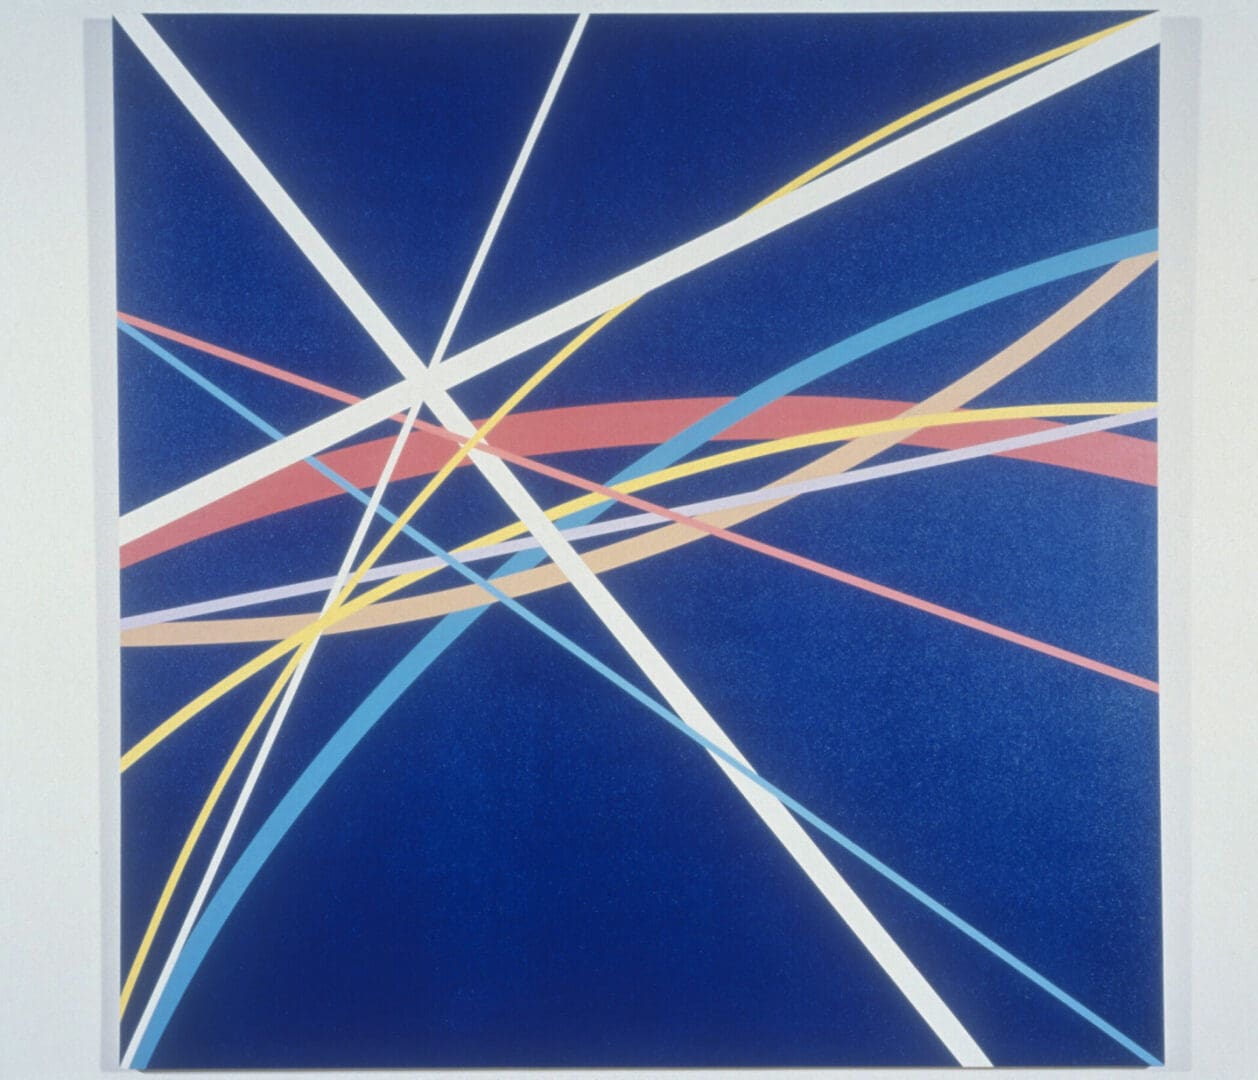 Clifford Singer. Star Fighter. 1986. Acrylic on Canvas. 70 x 70 inches